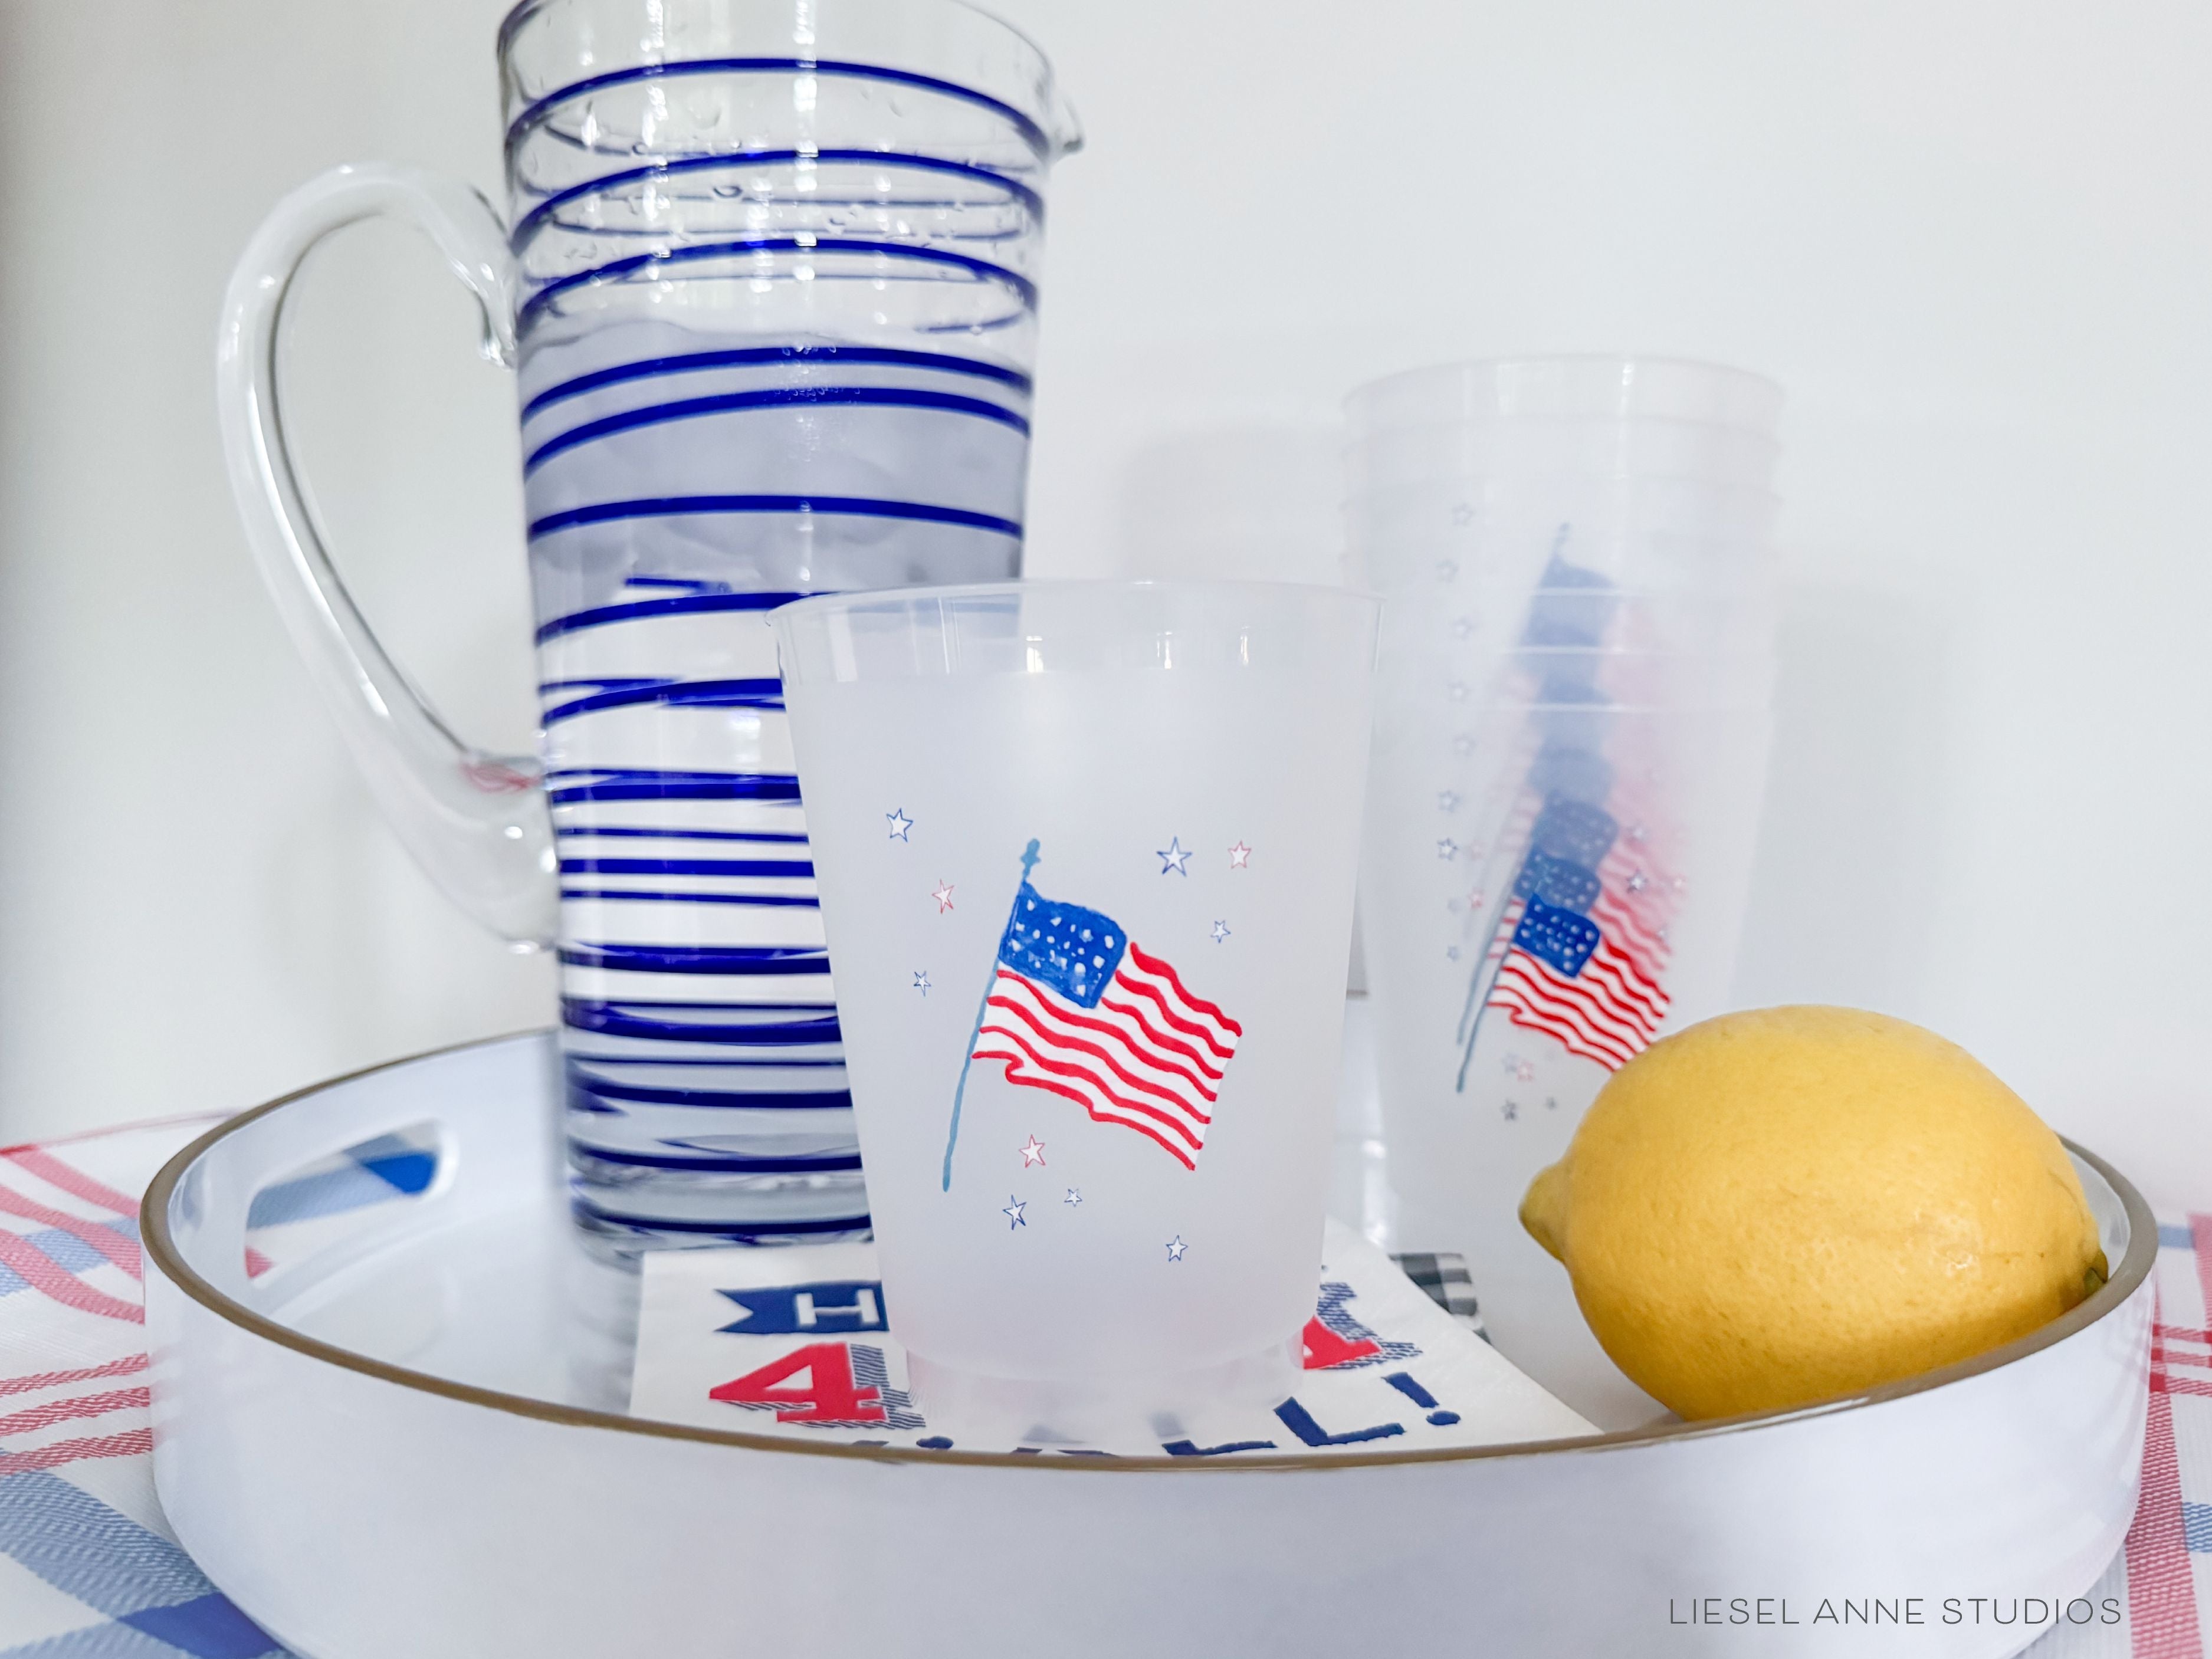 American Flag 16oz Shatterproof Cups [Set of 8]-These shatterproof cups feature our hand-painted American Flag & Stars and make great party decorations for your 4th of July cook outs, patriotic pool parties, military homecomings and more! They come in sets of 8 and are re-usable for other parties to come or make wonderful party favors!-The Singing Little Bird